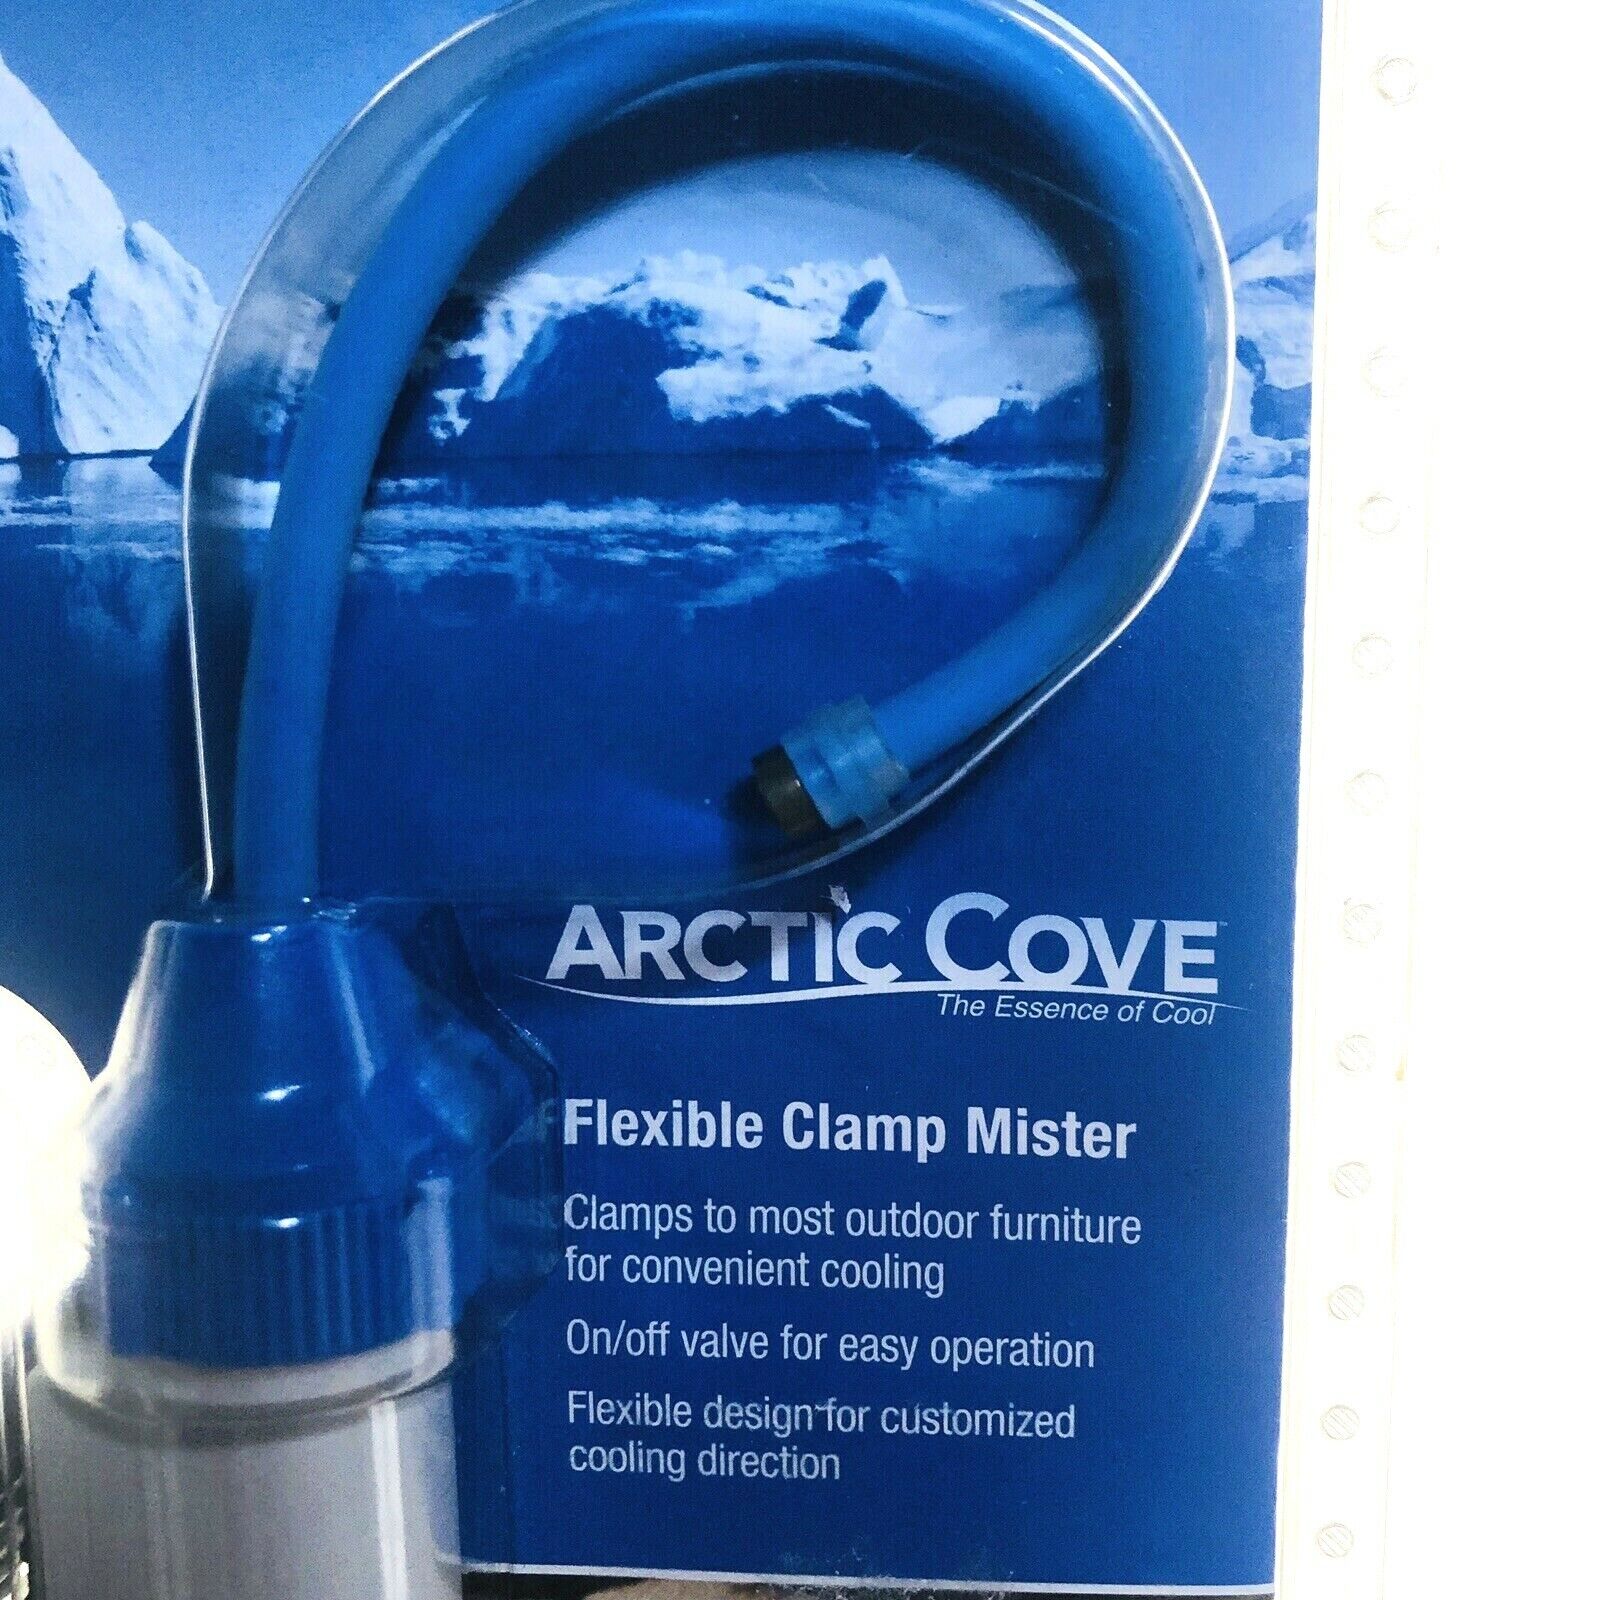 Flexible Clamp Mister by Artic Cove MCLM008 